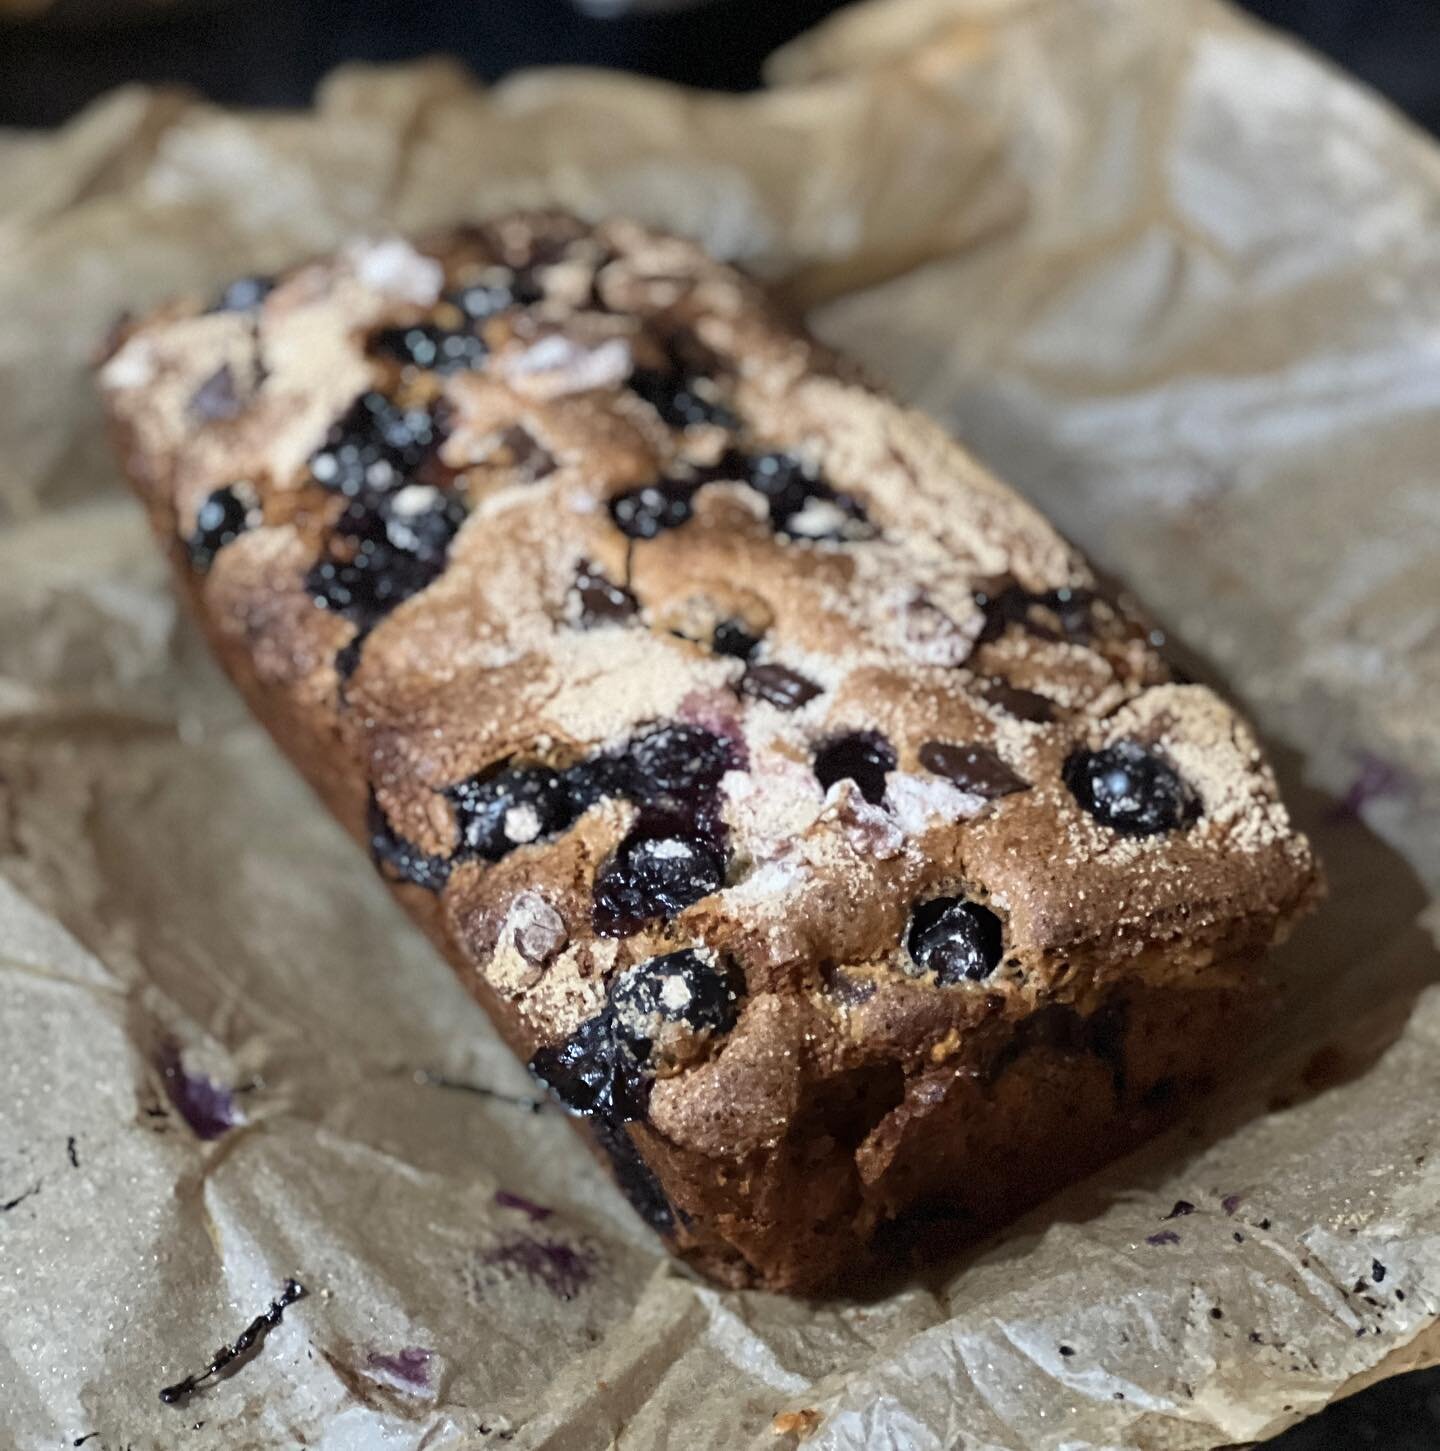 Dark Chocolate Blueberry Absolutely Shamelessly Brazen Shake Dat Bussy Get Your Coat you&rsquo;ve pulled Banana Loaf Cake for a Sunday afternoon 

-
-
-
-
-
-
-
-

#glutenfree #vegan #healthyfood #dairyfree #plantbased #foodie #foodporn #vegetarian #